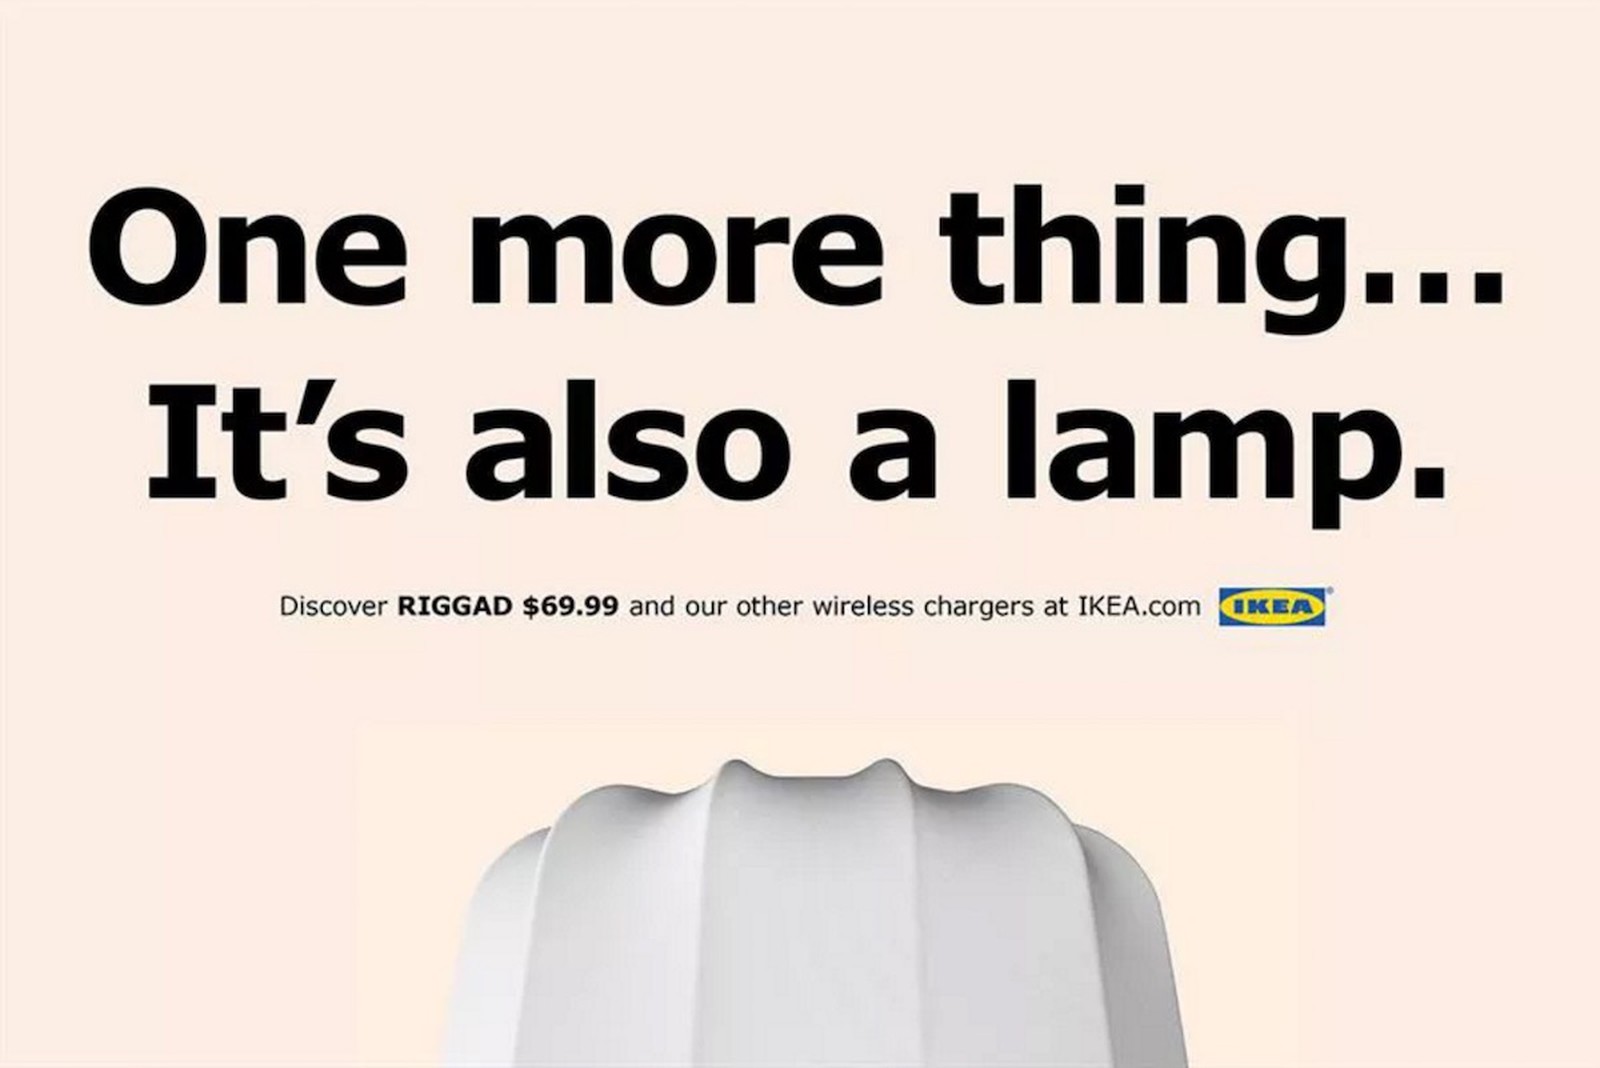 IKEA Launches New Apple-Inspired Ad Campaign for Qi ...